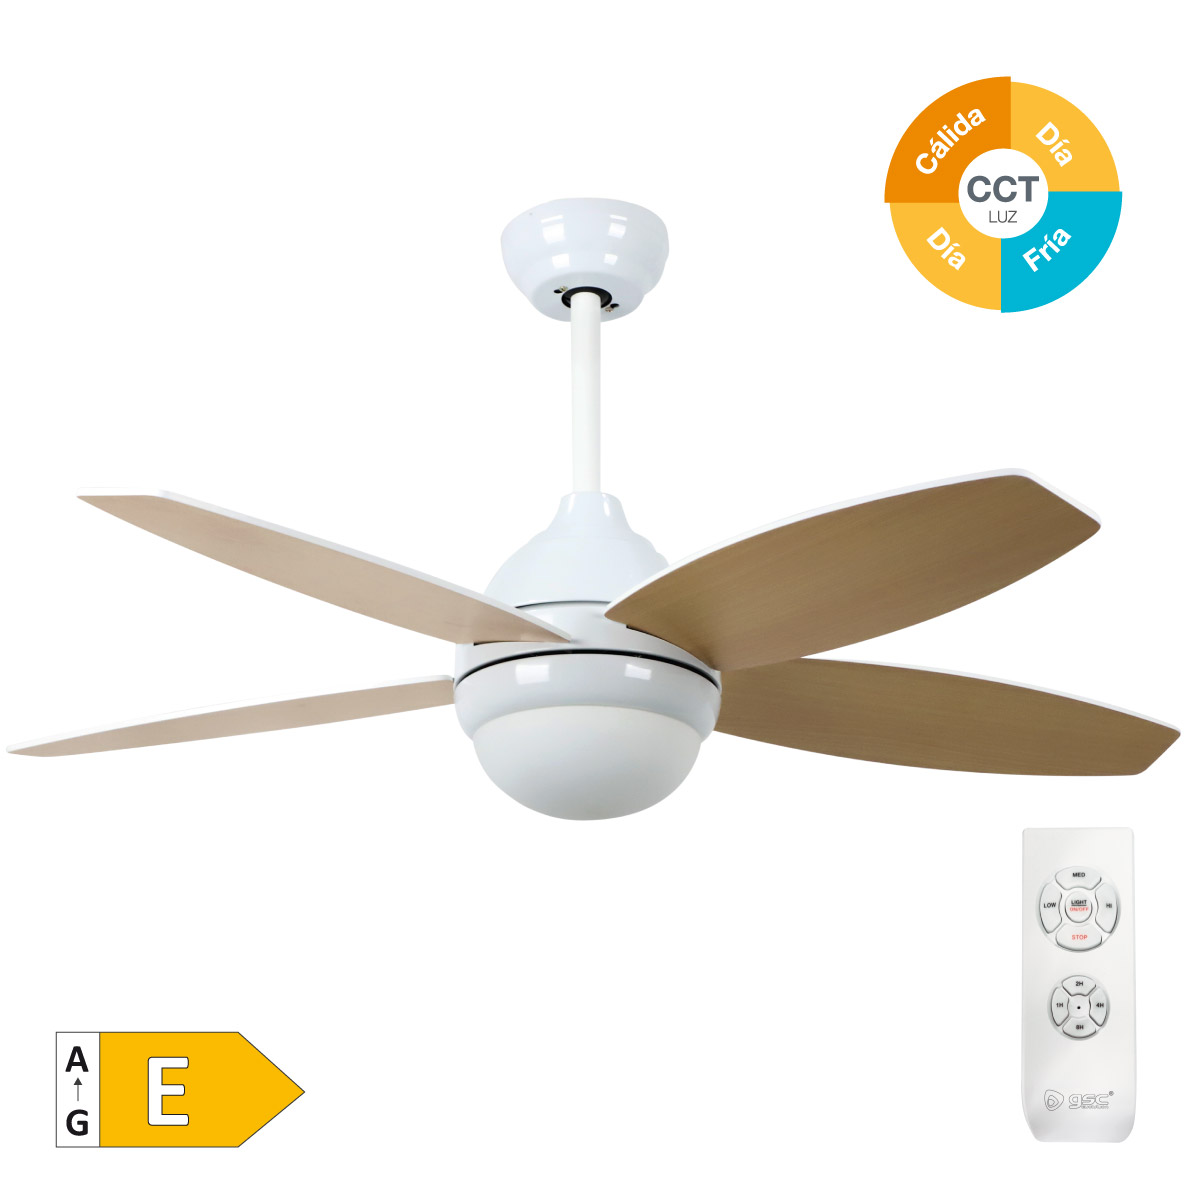 42' DC ceiling fan with remote control CCT 4 reversible blades wood effect white/haya